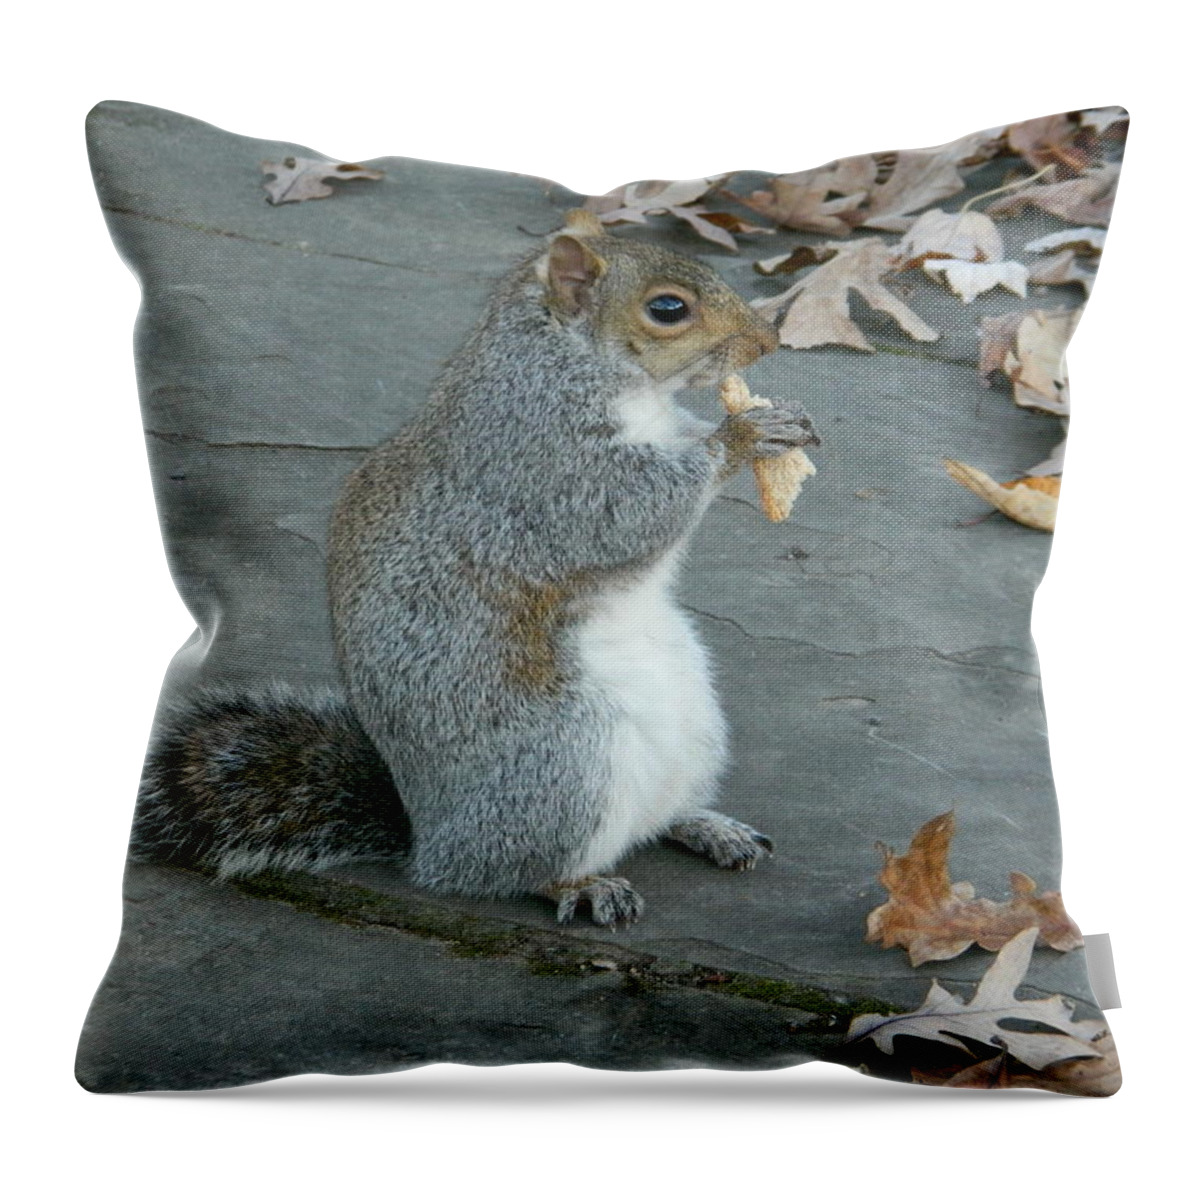 Squirrel Chomping On Bread Throw Pillow featuring the photograph Squirrel Chomping On Bread by Emmy Vickers